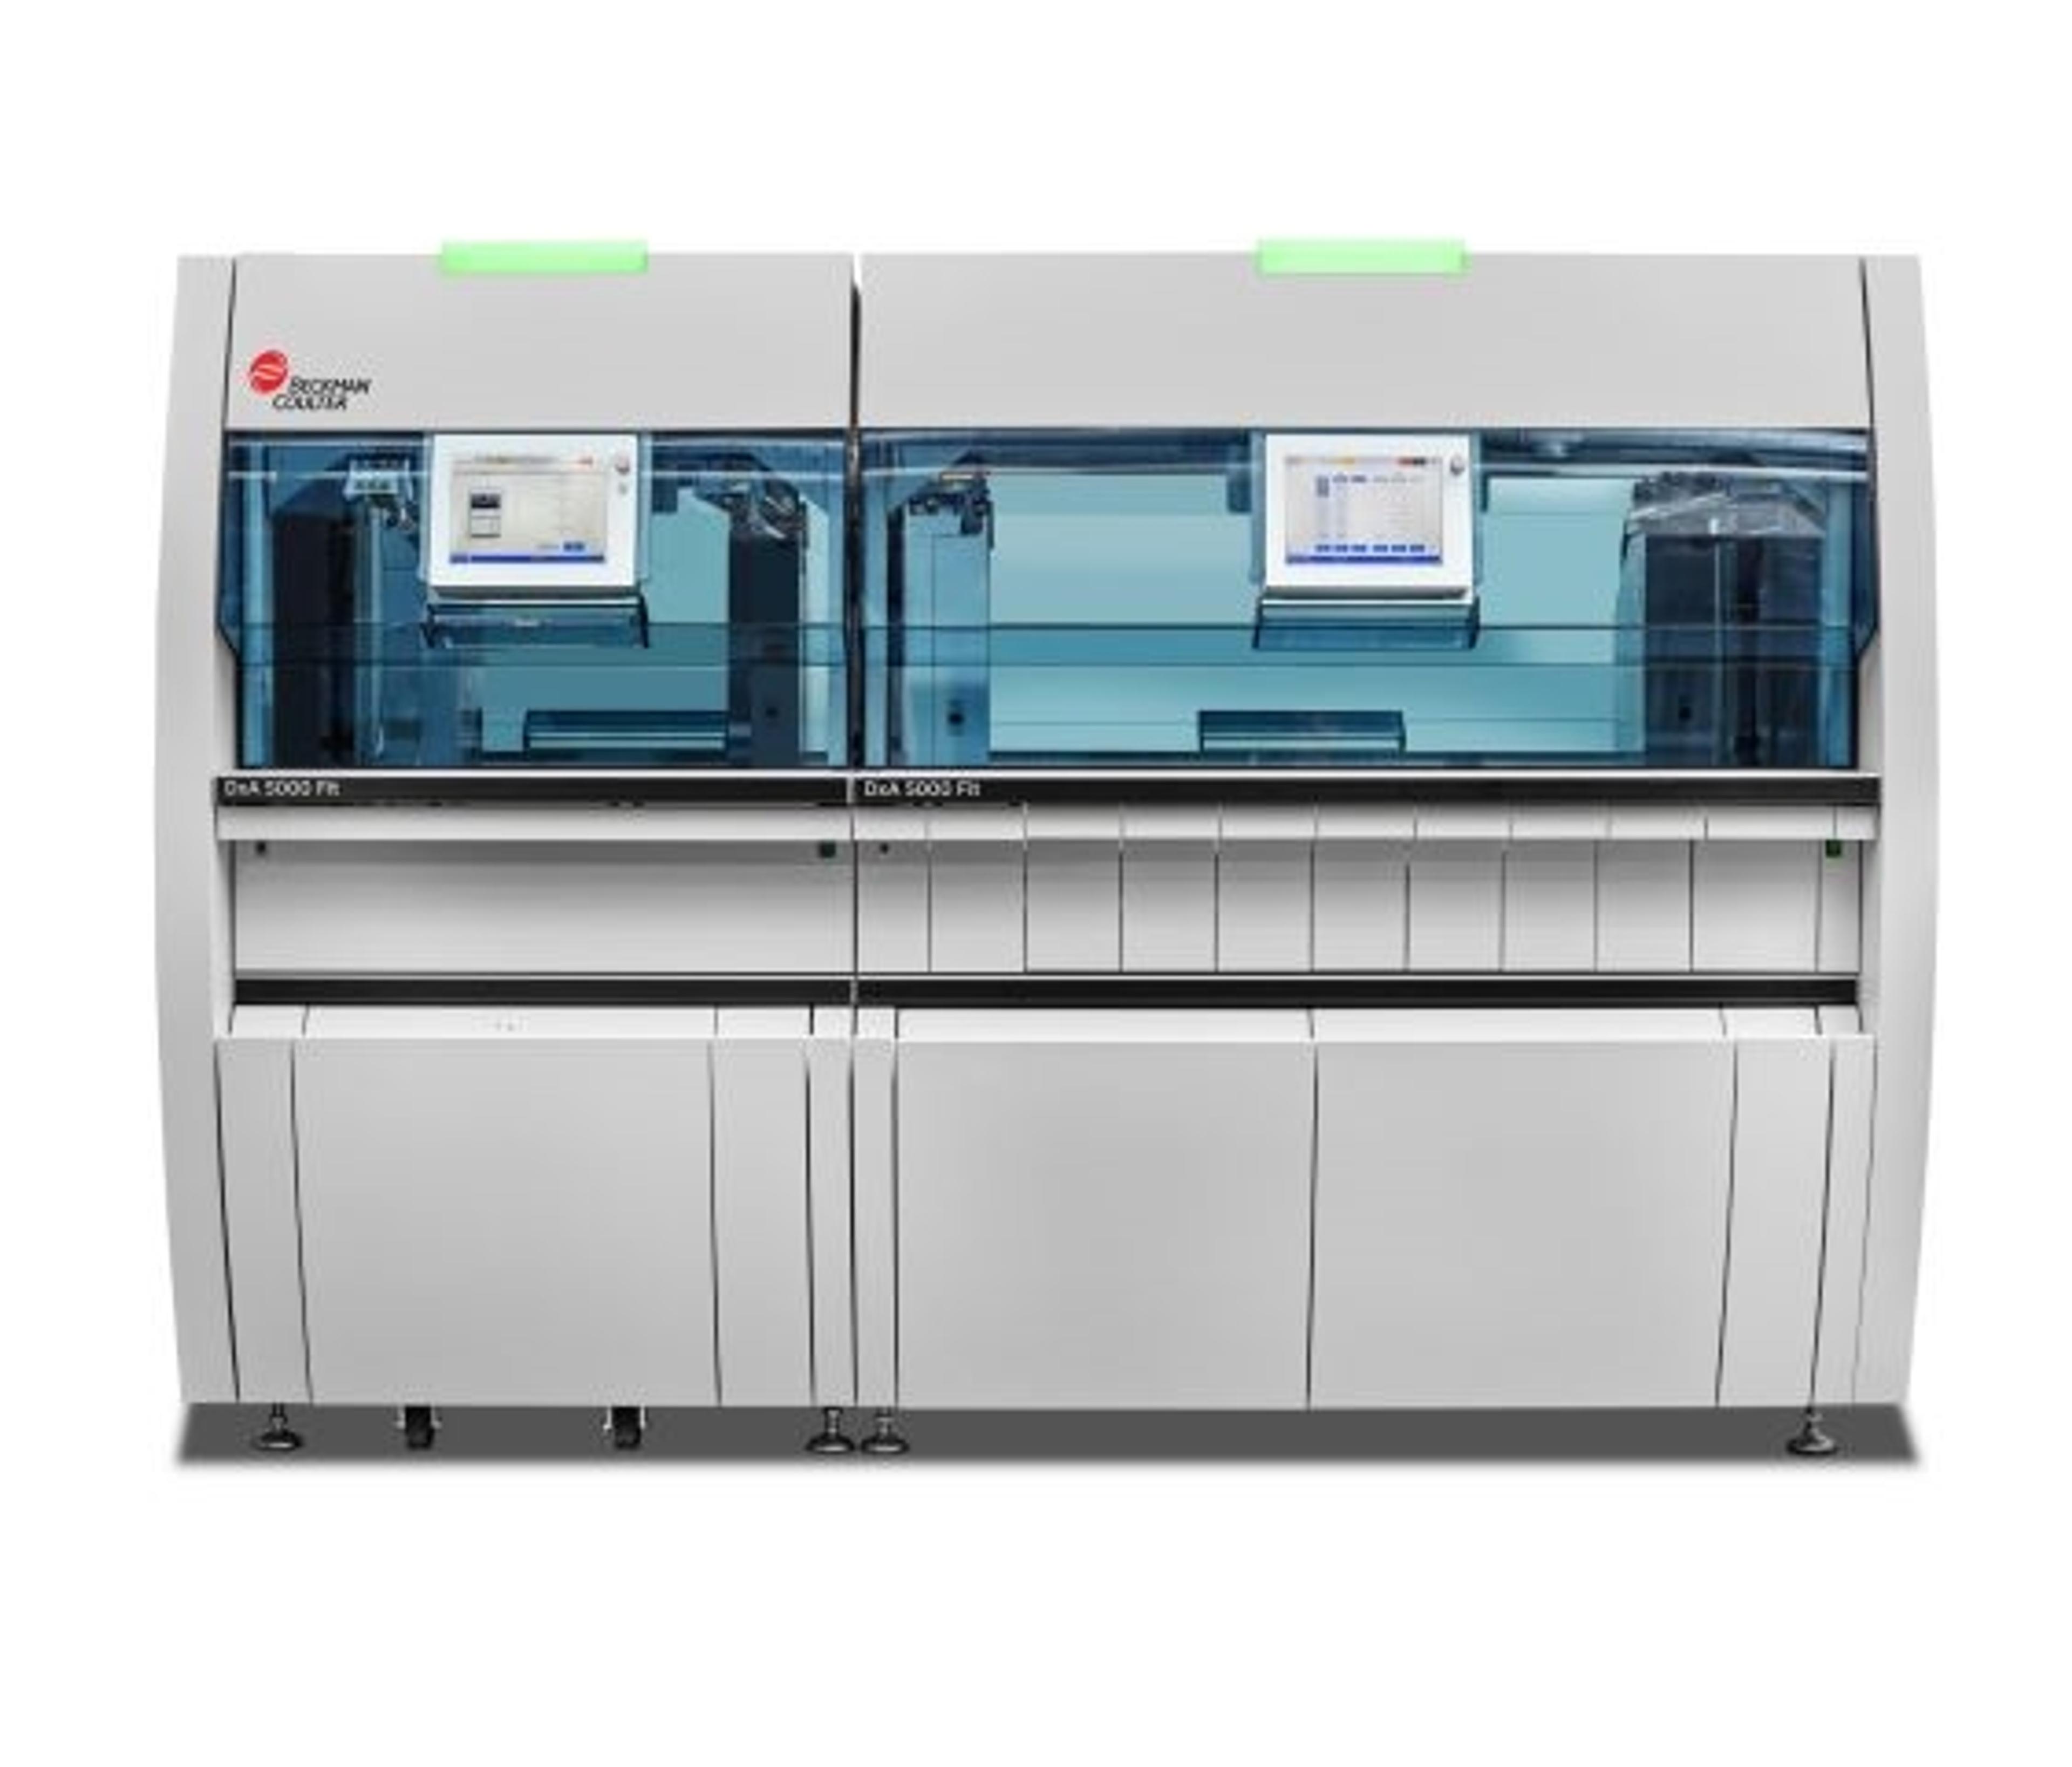 DxA 5000 Fit Workflow Automation System